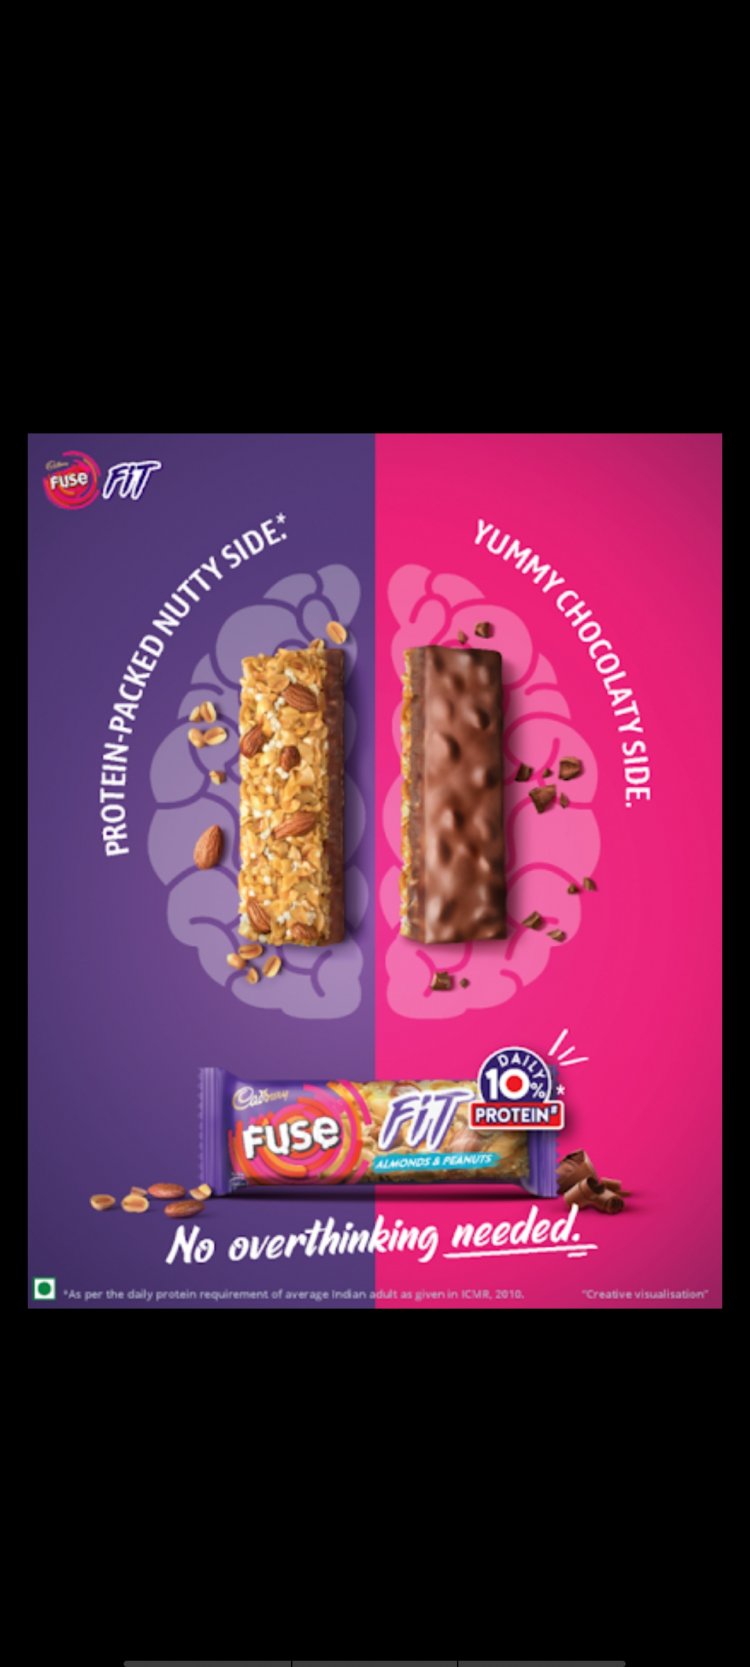 Mondelez India Marks Its Foray into The Snack Bar Category, with Cadbury Fuse Fit.